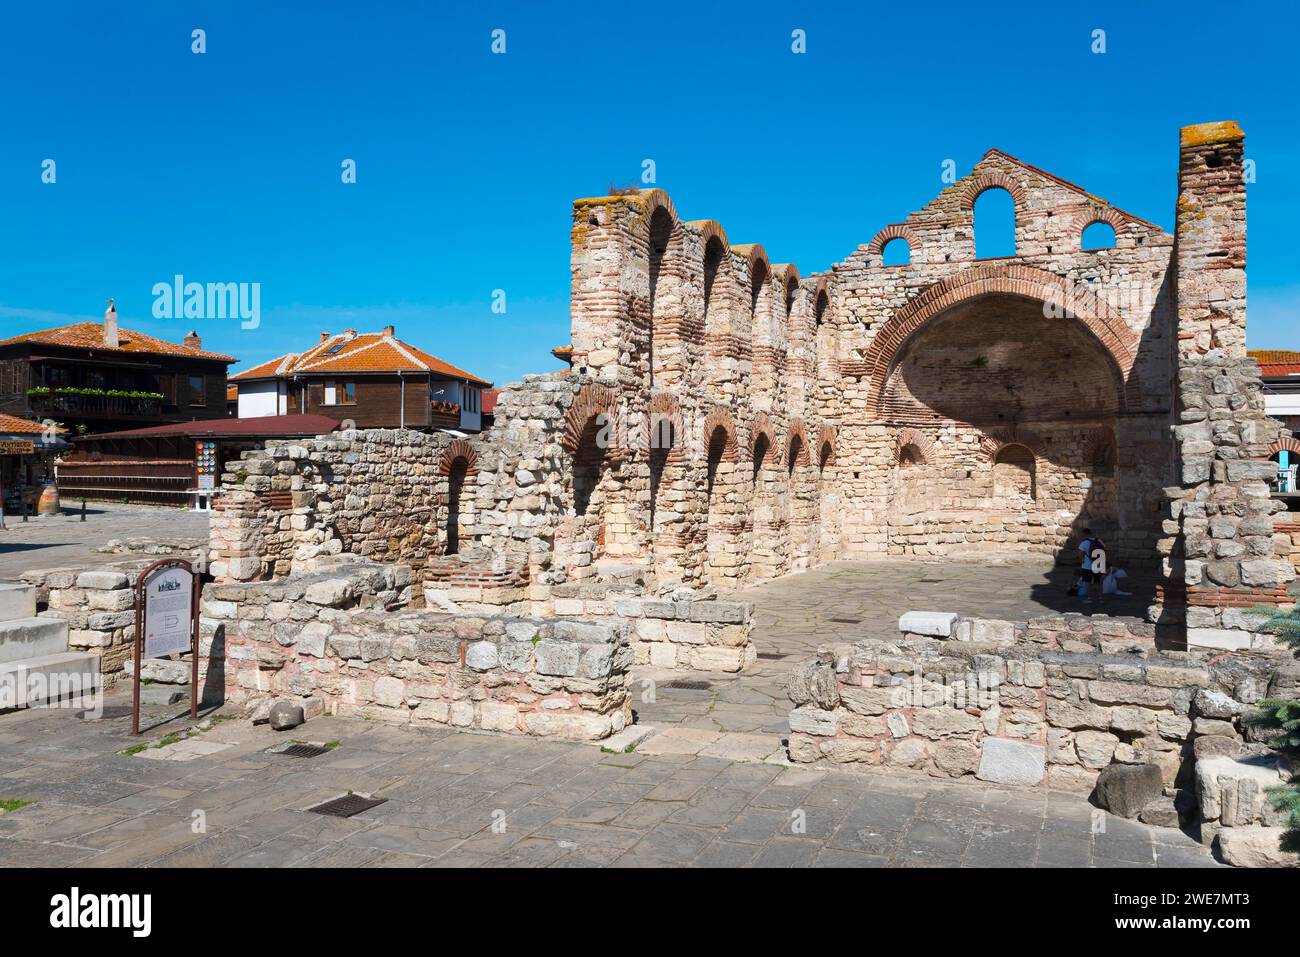 Ruins of a historic building with arched structure and exposed brickwork, Church of St Sophia, Church of St Sophia, Unesco World Heritage Site, Black Stock Photo